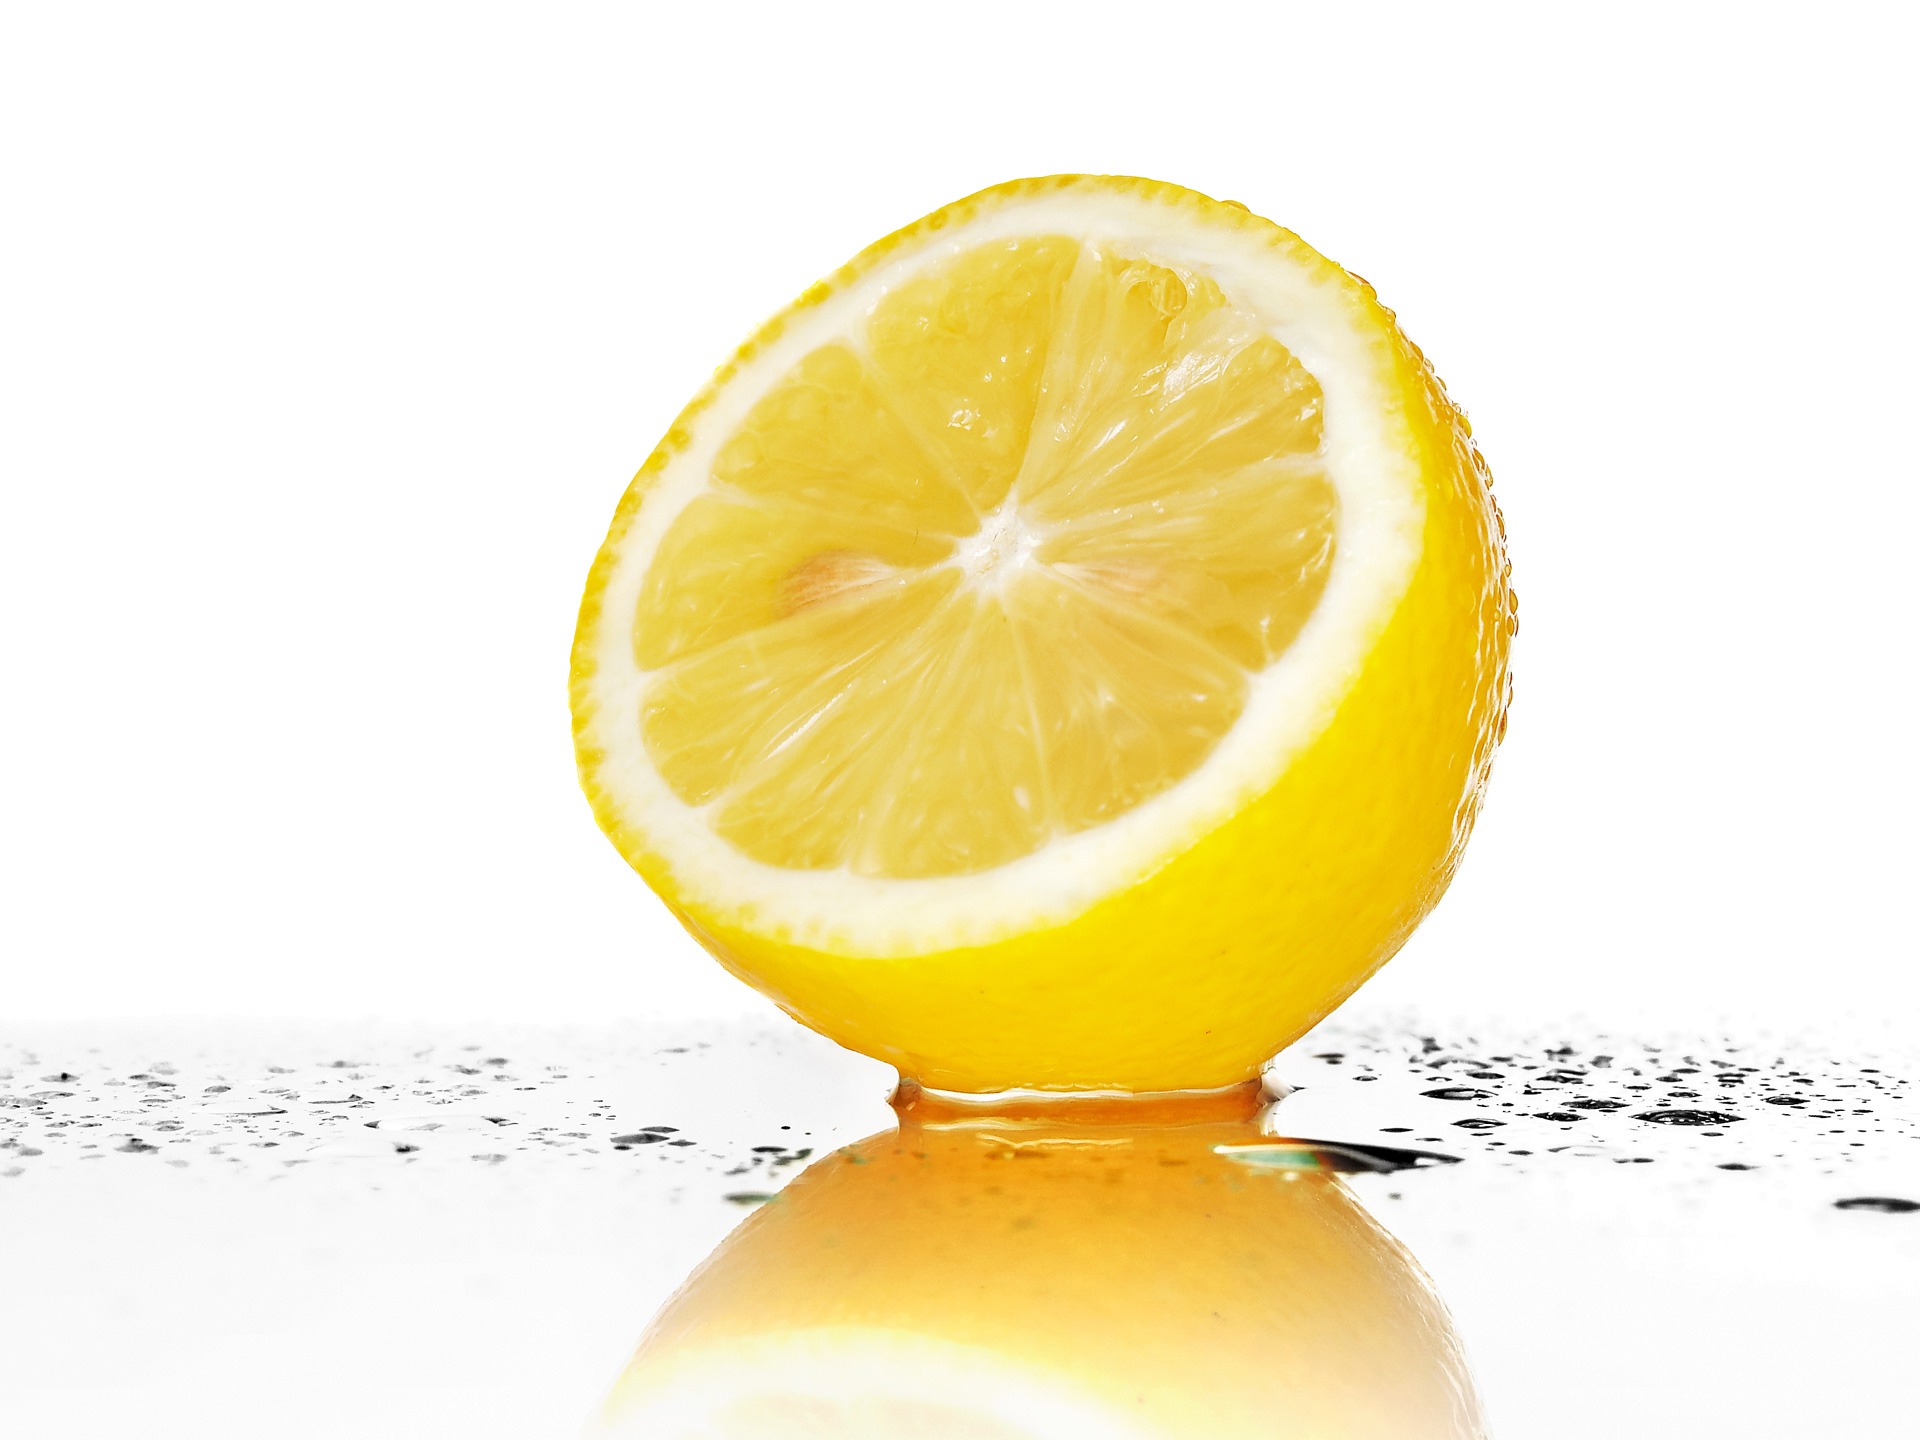 A Year of Natural Health & Beauty Tip #9: Use Lemon to Fade Skin ...